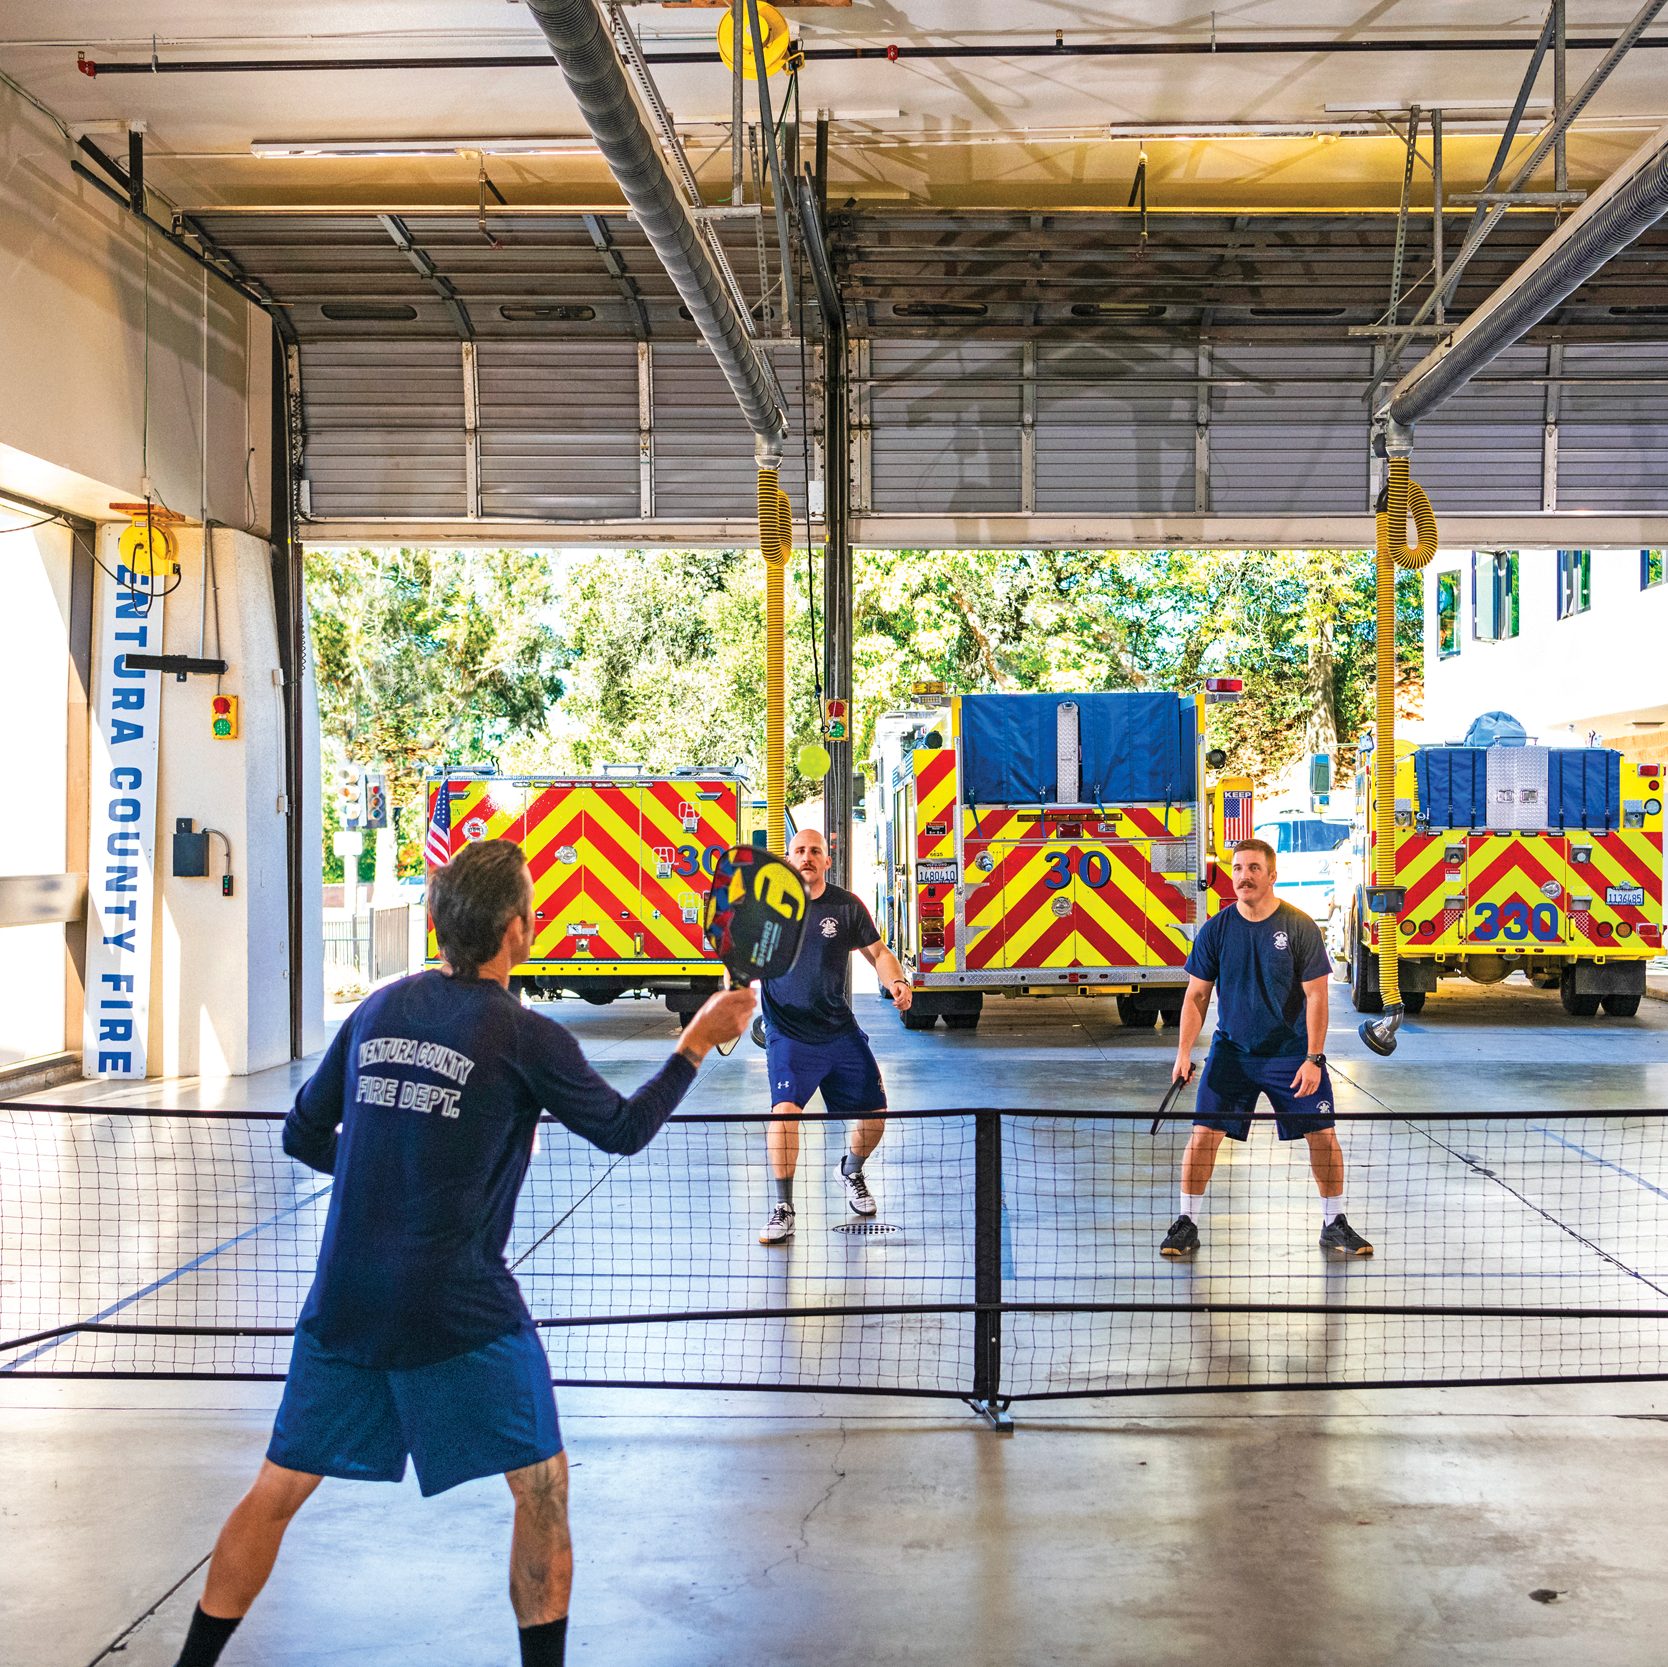 InPickleball | Keeping Fit - Ventura firefighters playing pickleball to stay in shape, lessen injuries, and meet their required workout period during shifts